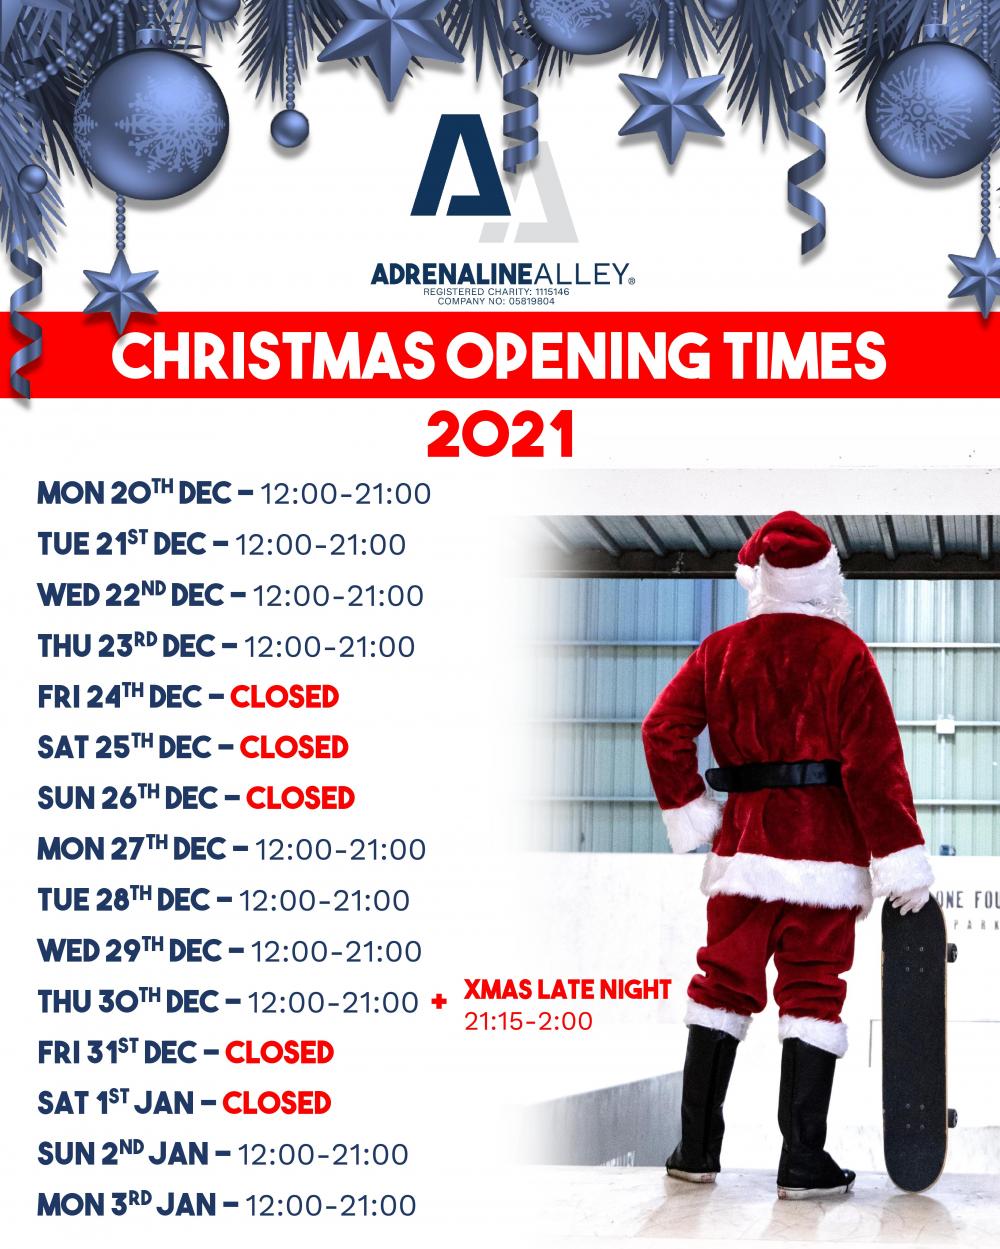 CHRISTMAS OPENING TIMES 2021